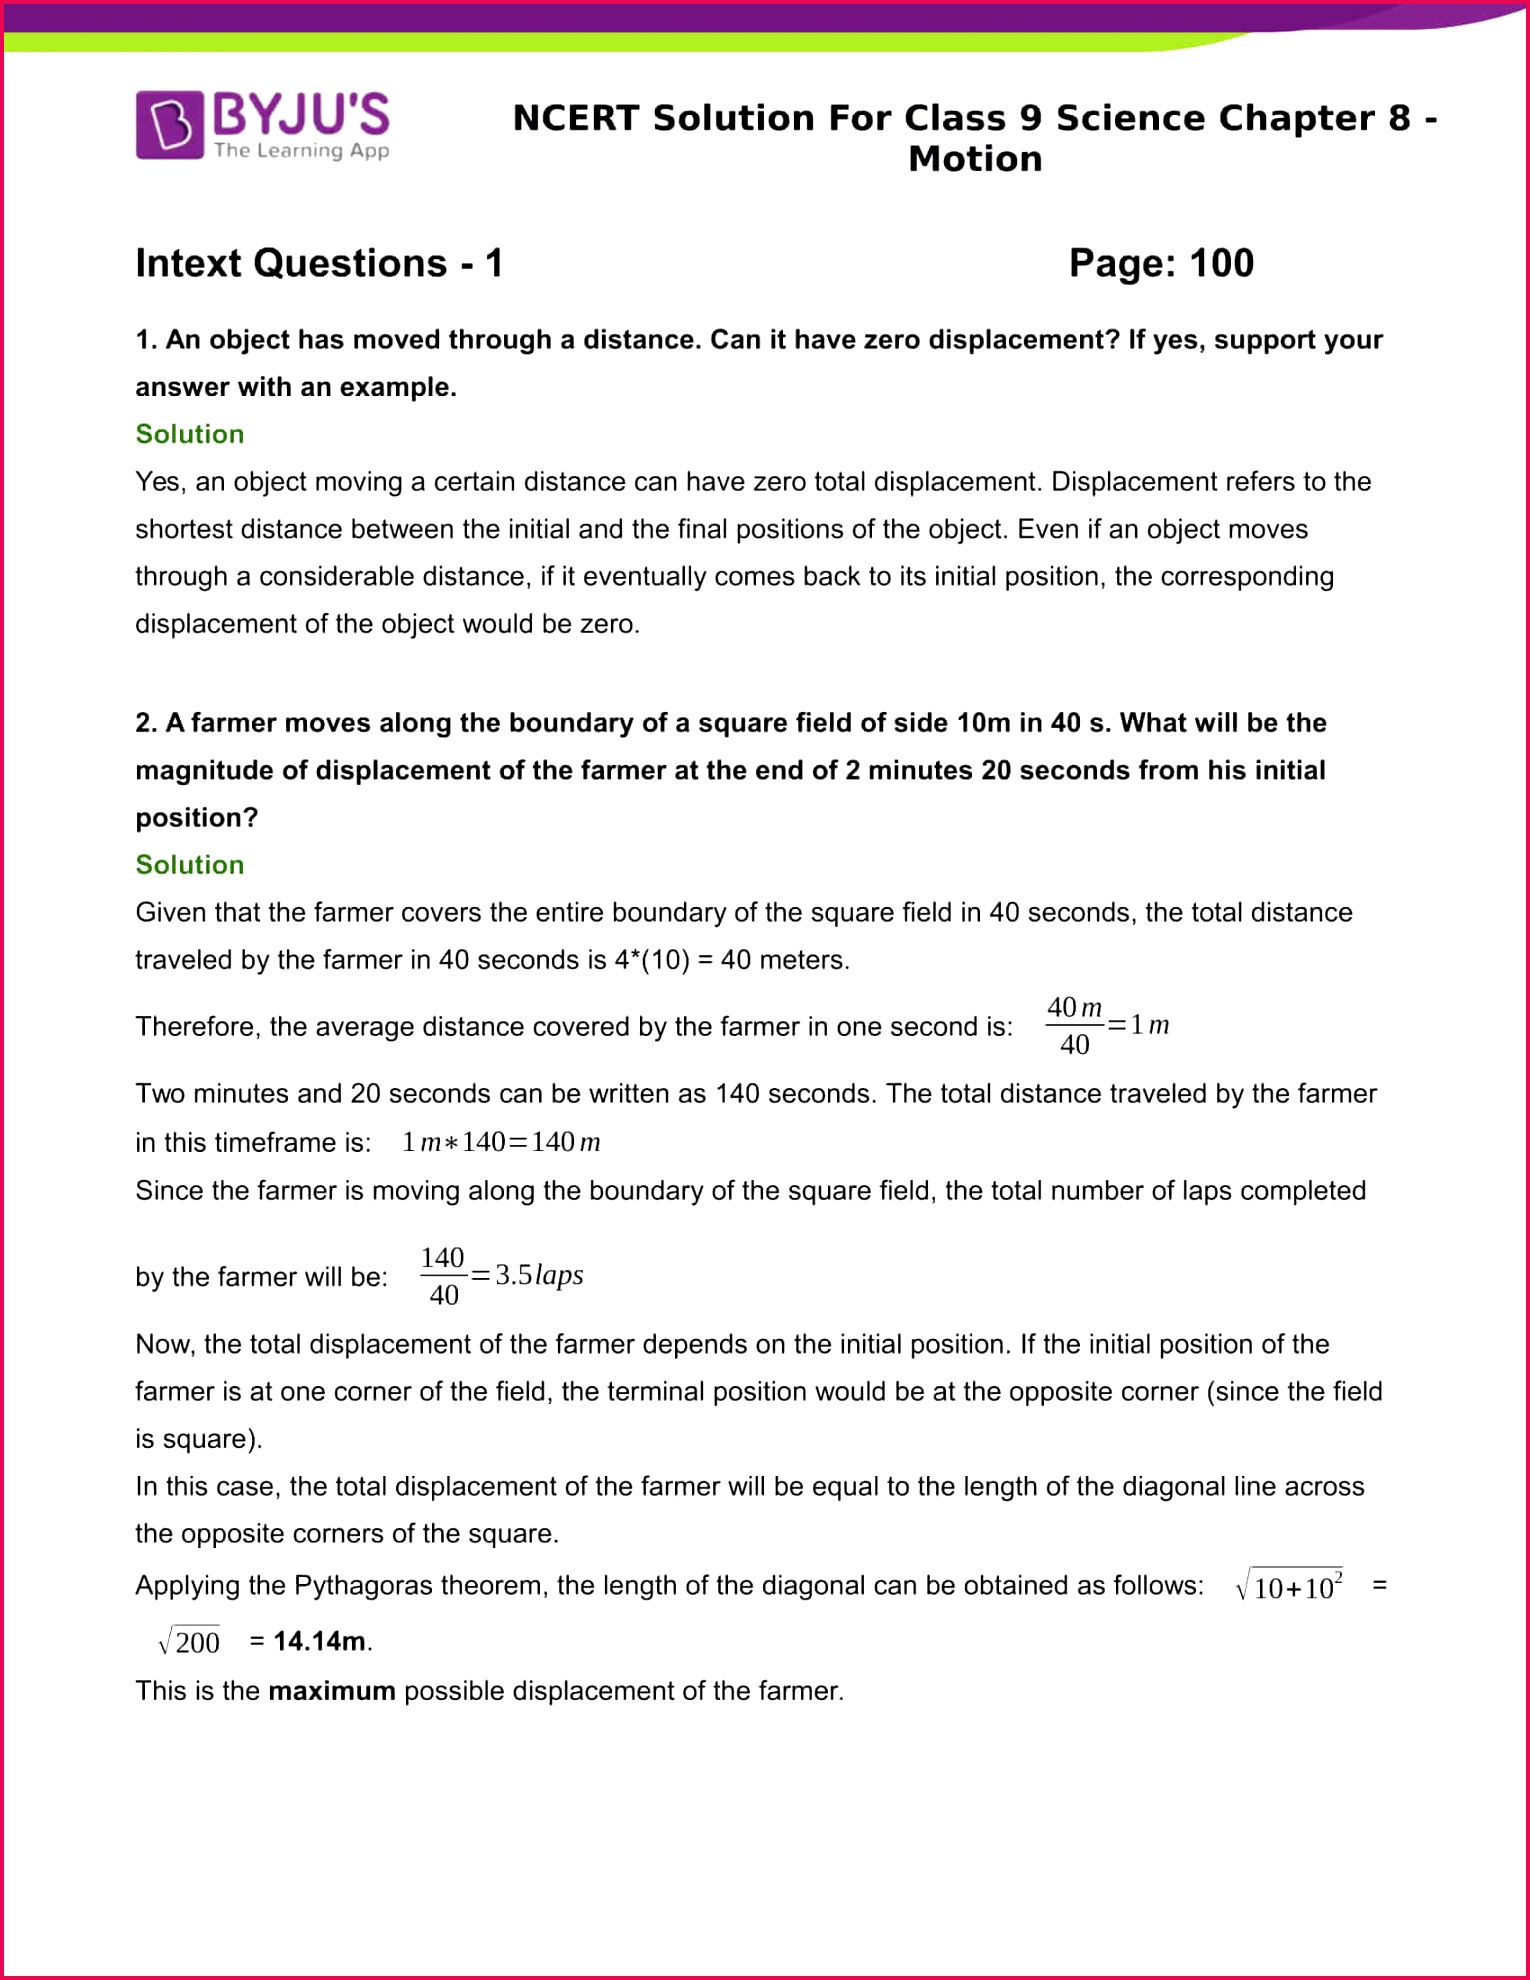 Download PDF of NCERT Solutions for Class 9 Science Chapter 8 Motion